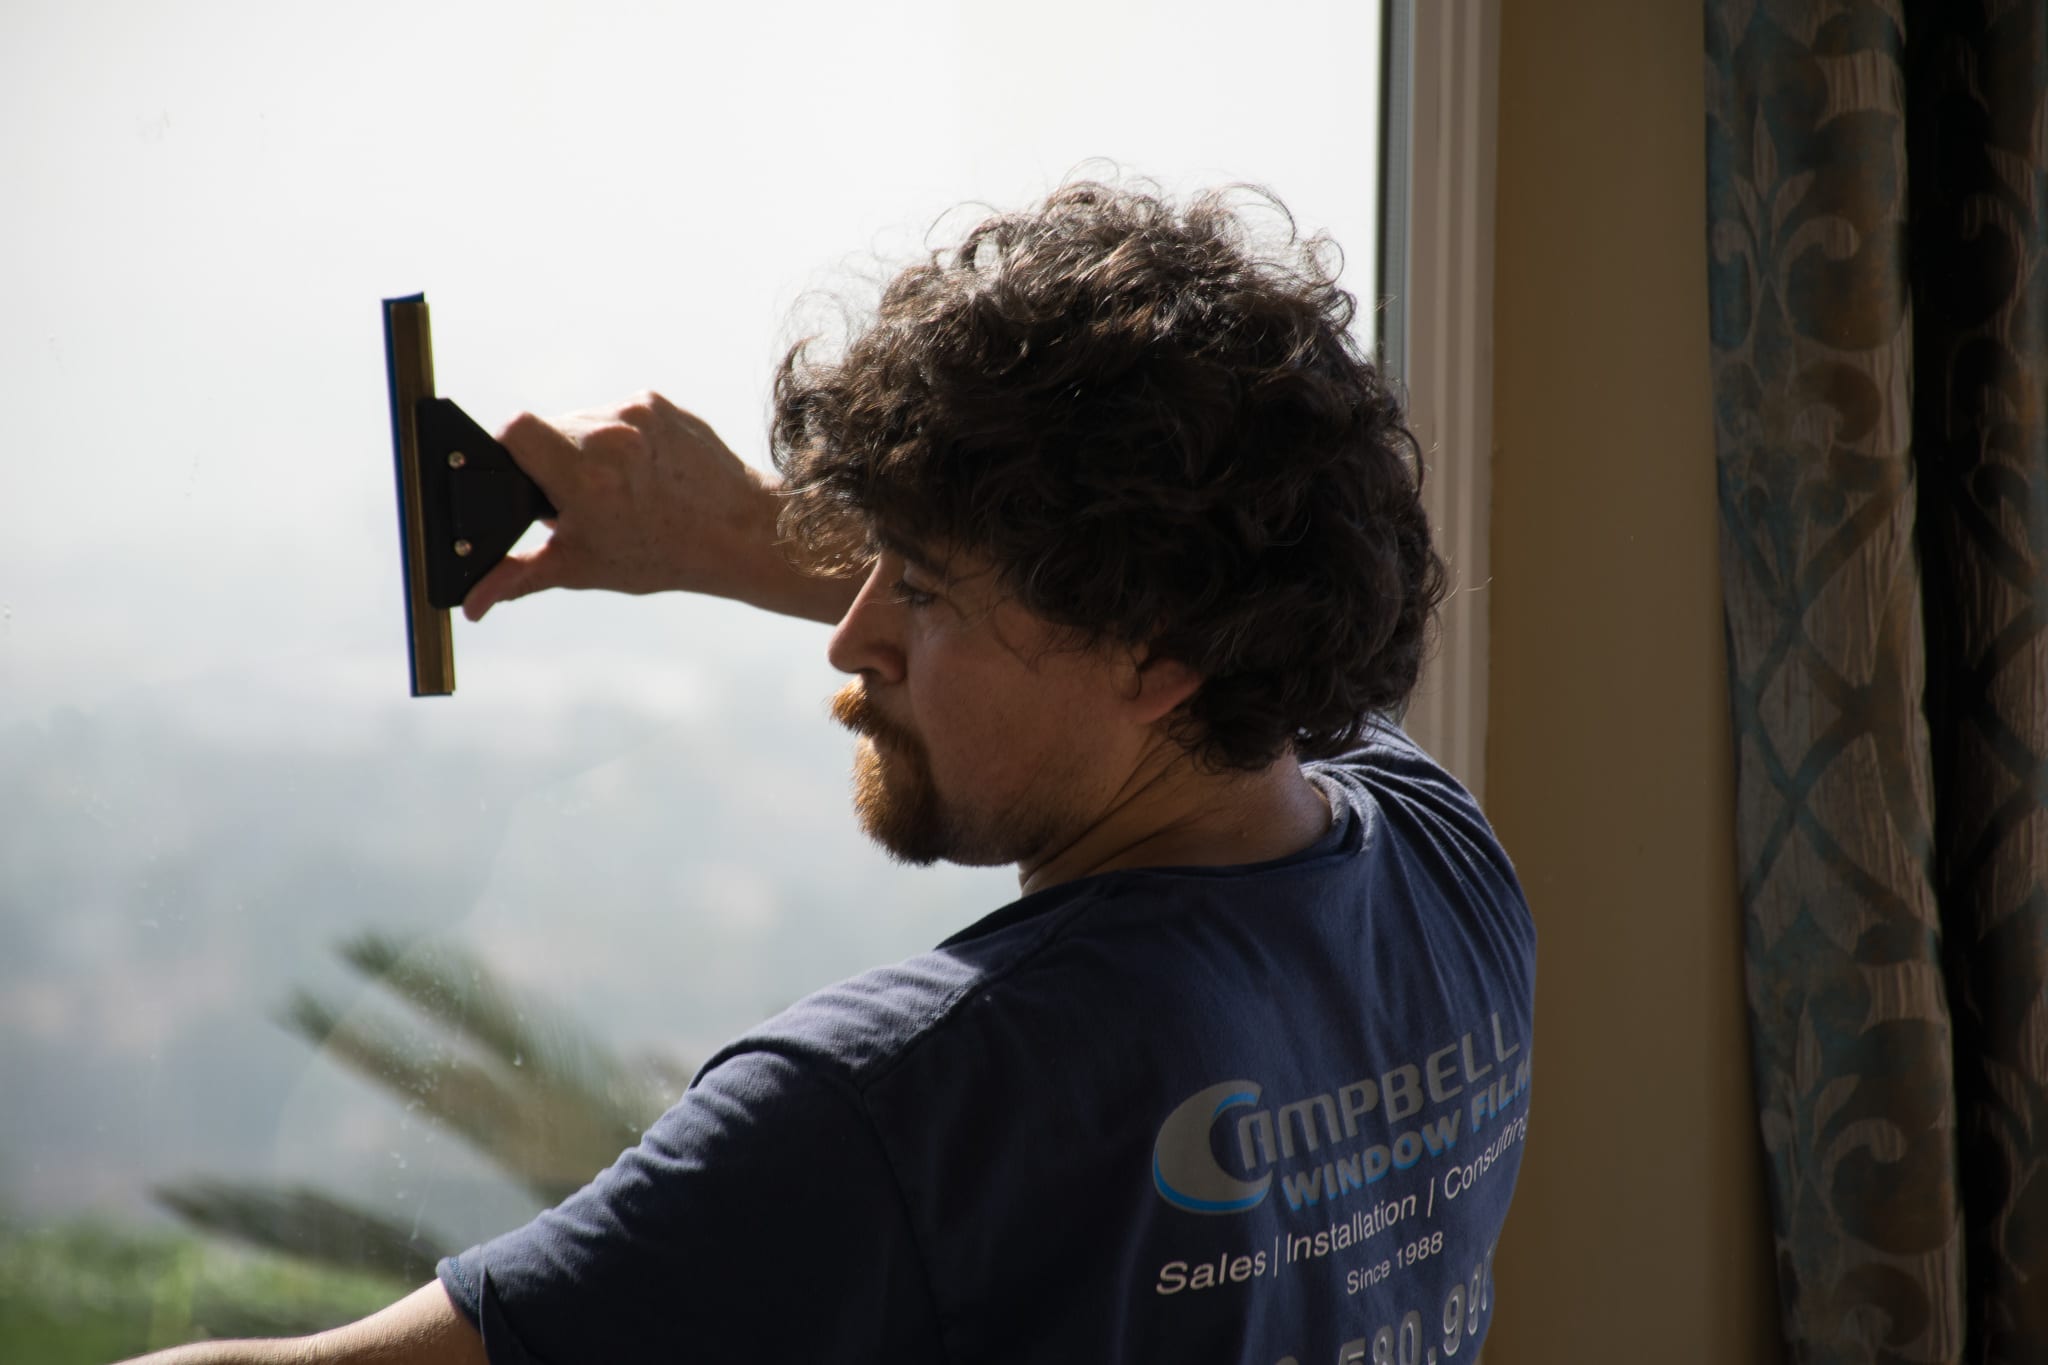 How To Remove Old Window Tint From House & Building Windows